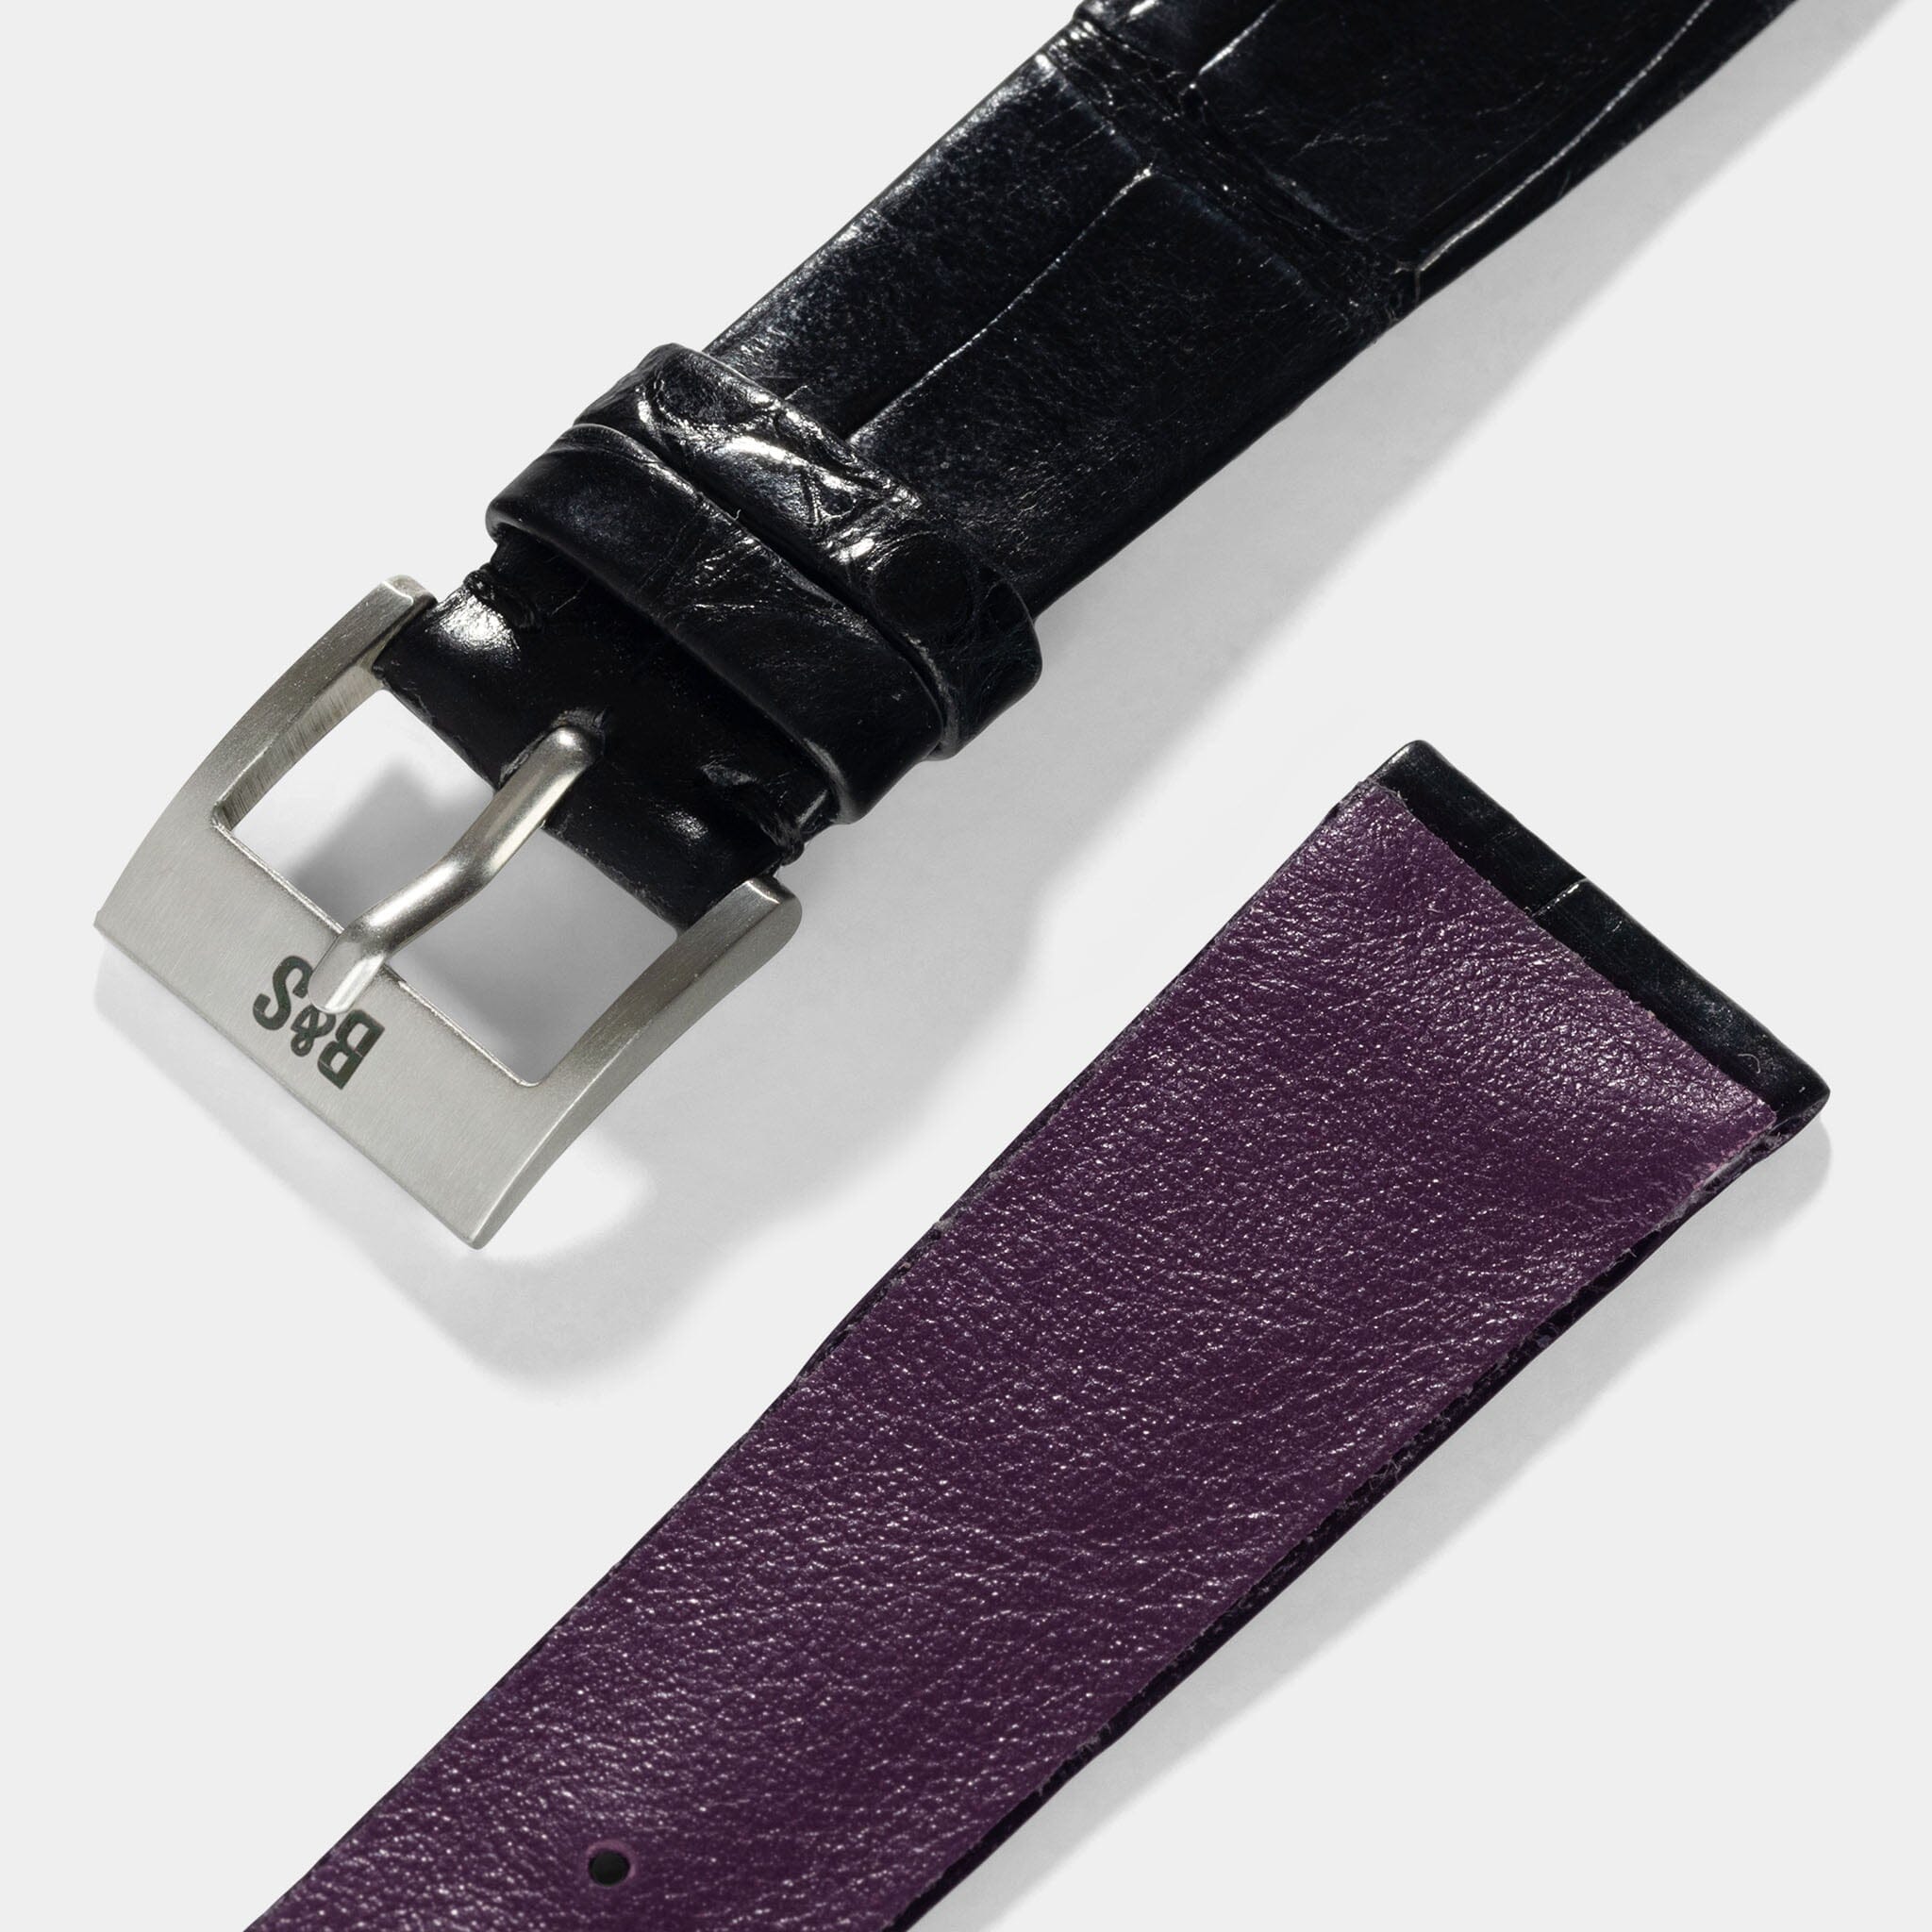 The Savile Row Leather Watch Strap - Luxury Tailored Alligator - Jubilee Edition